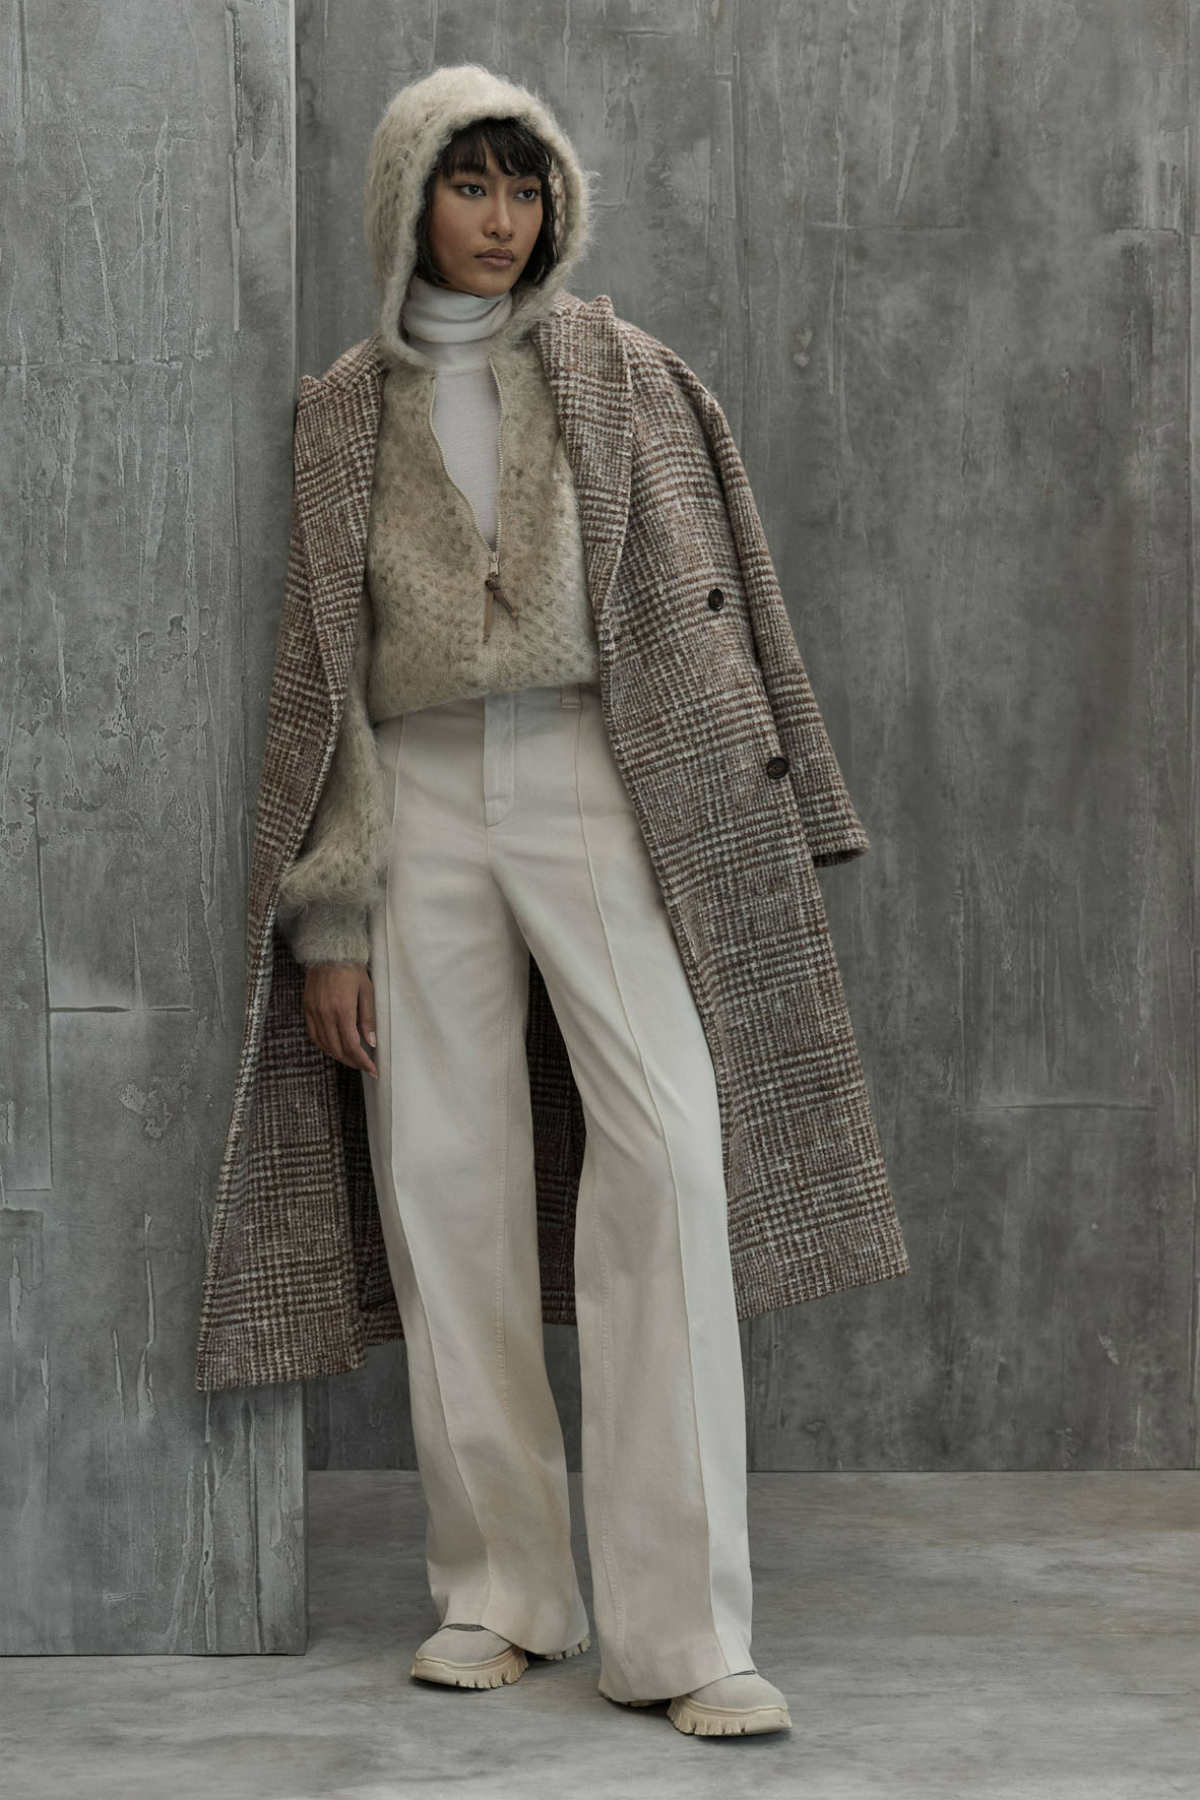 Italy's Brunello Cucinelli expects 28% net sales growth in FY22